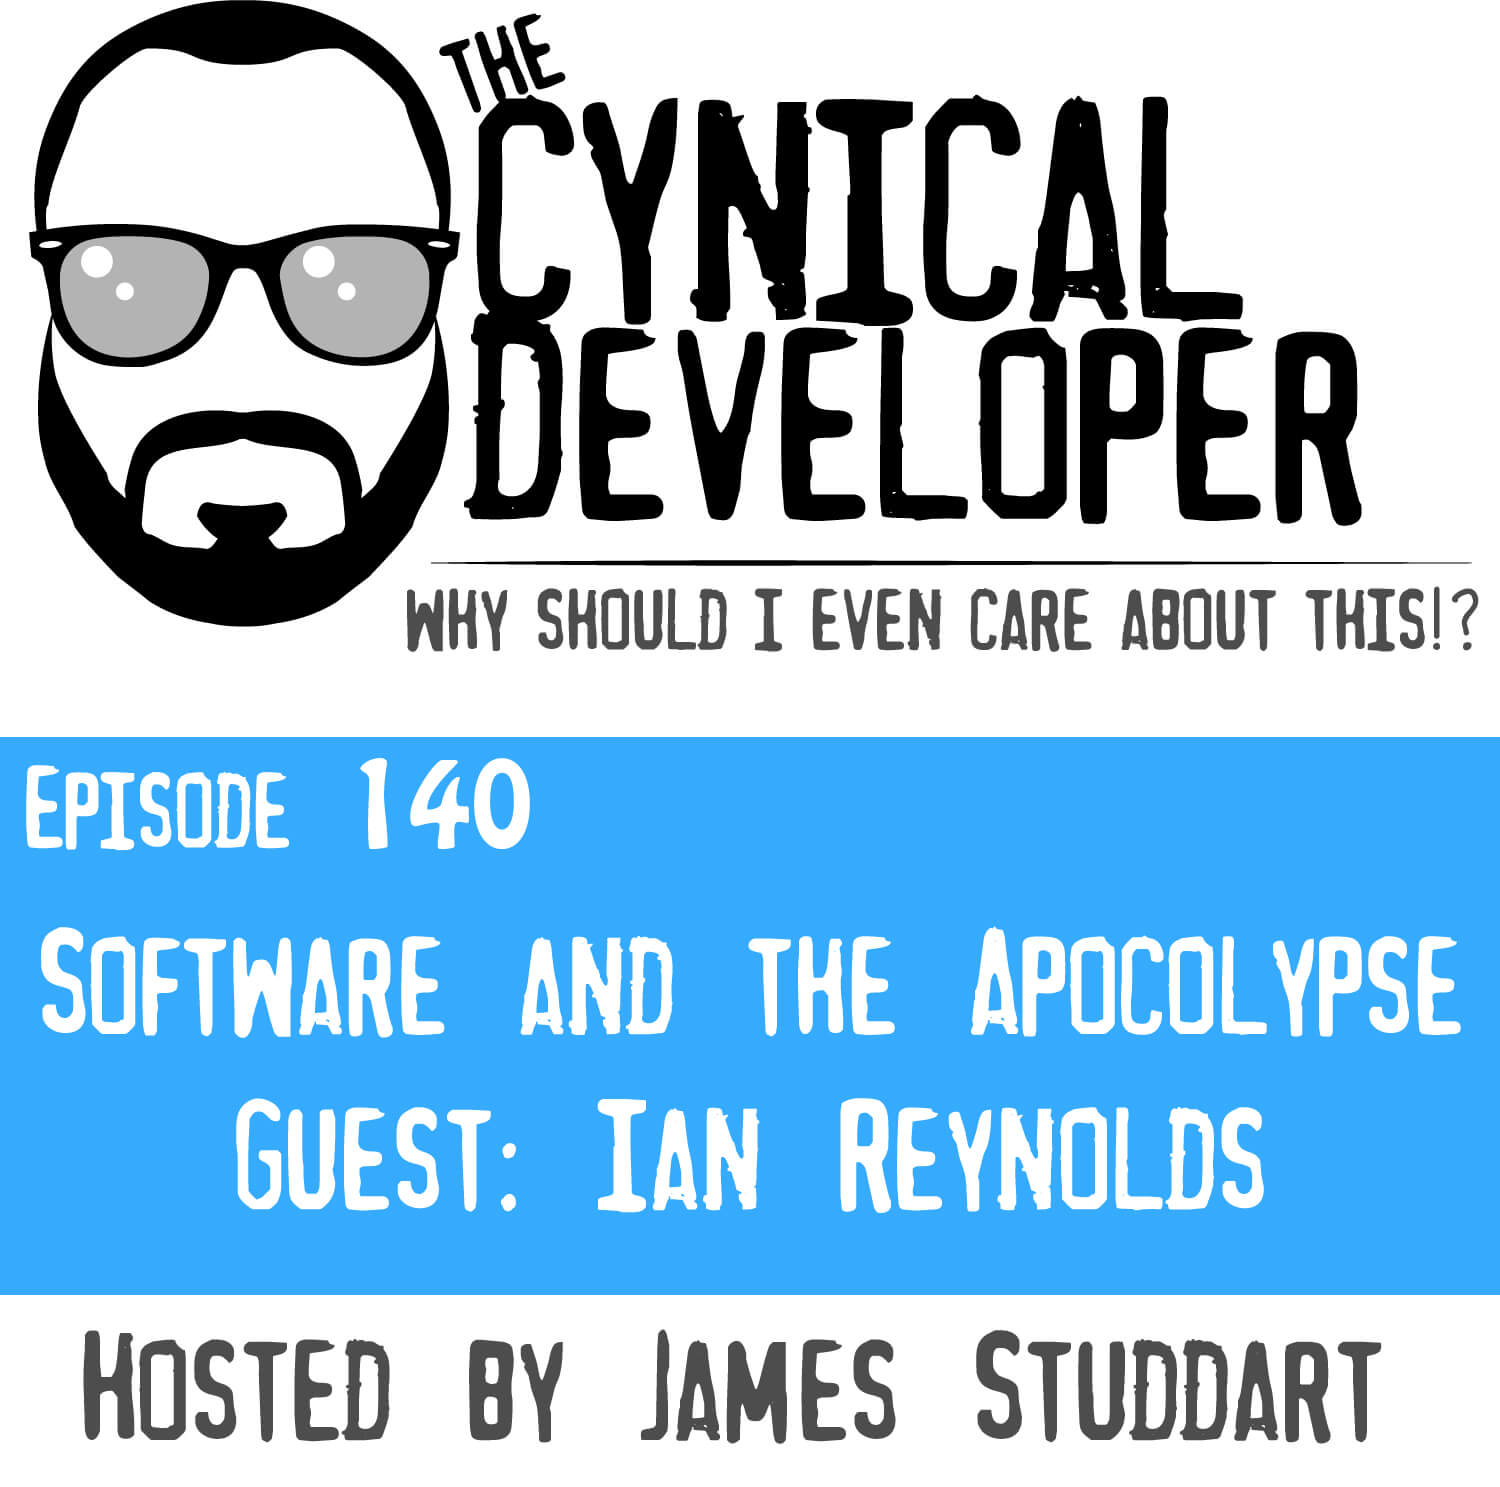 Episode 140 - Software and the Apocolypse